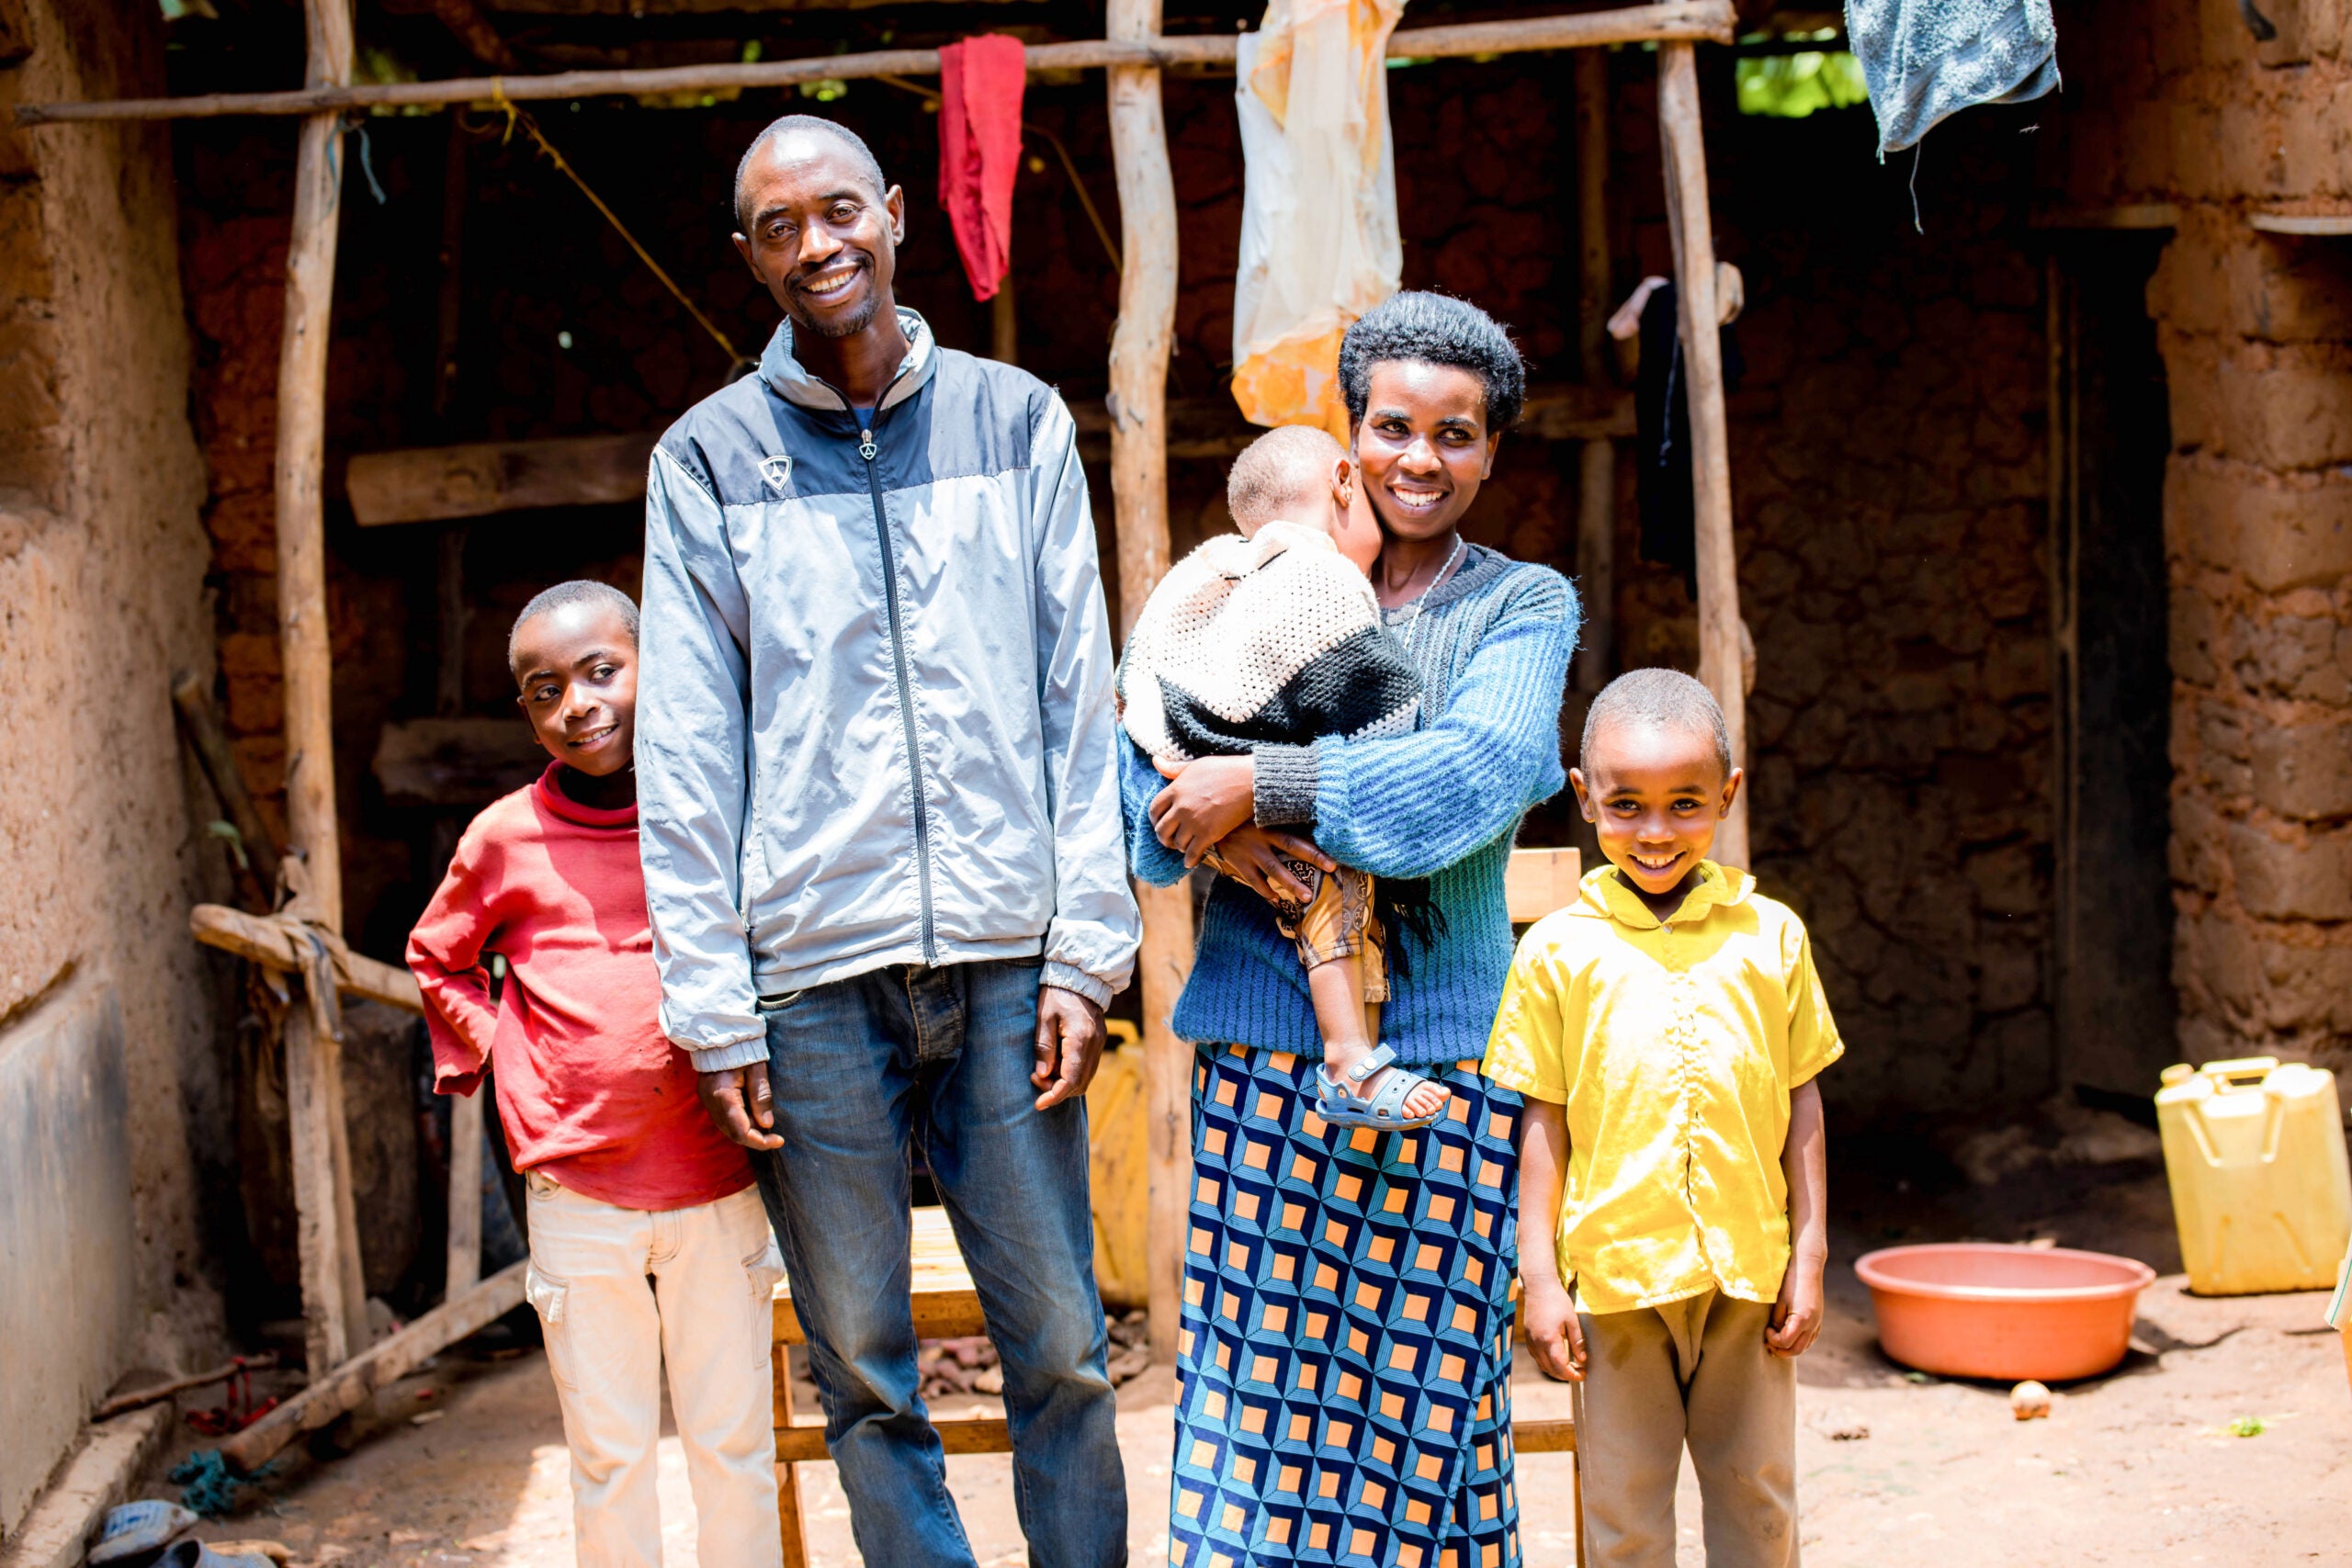 A Rwandan son (red shirt), dad (gray jacket), baby (white shirt) held by mom (blue and gray sweater), and son (yellow shirt) pose for a portrait